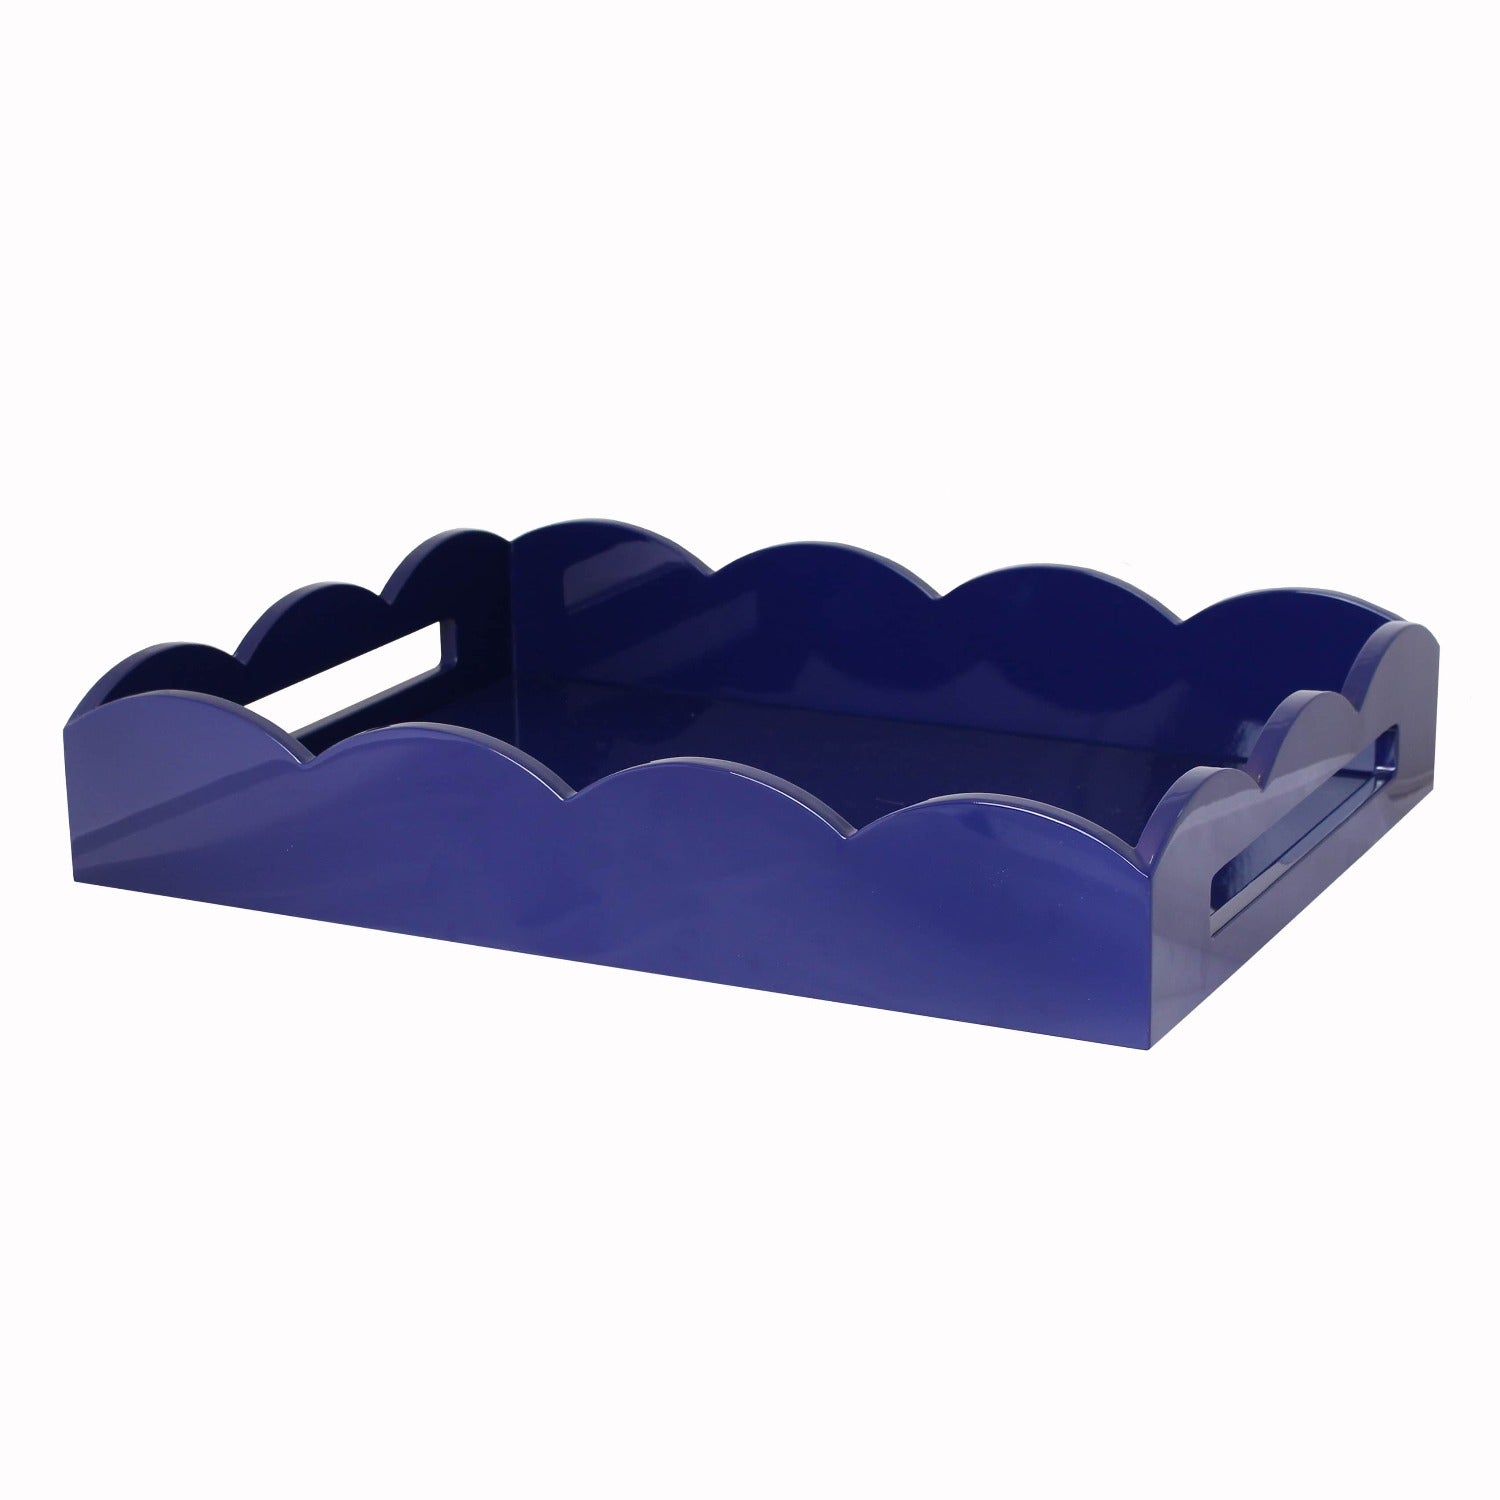 Lacquered Scalloped Tray - Navy